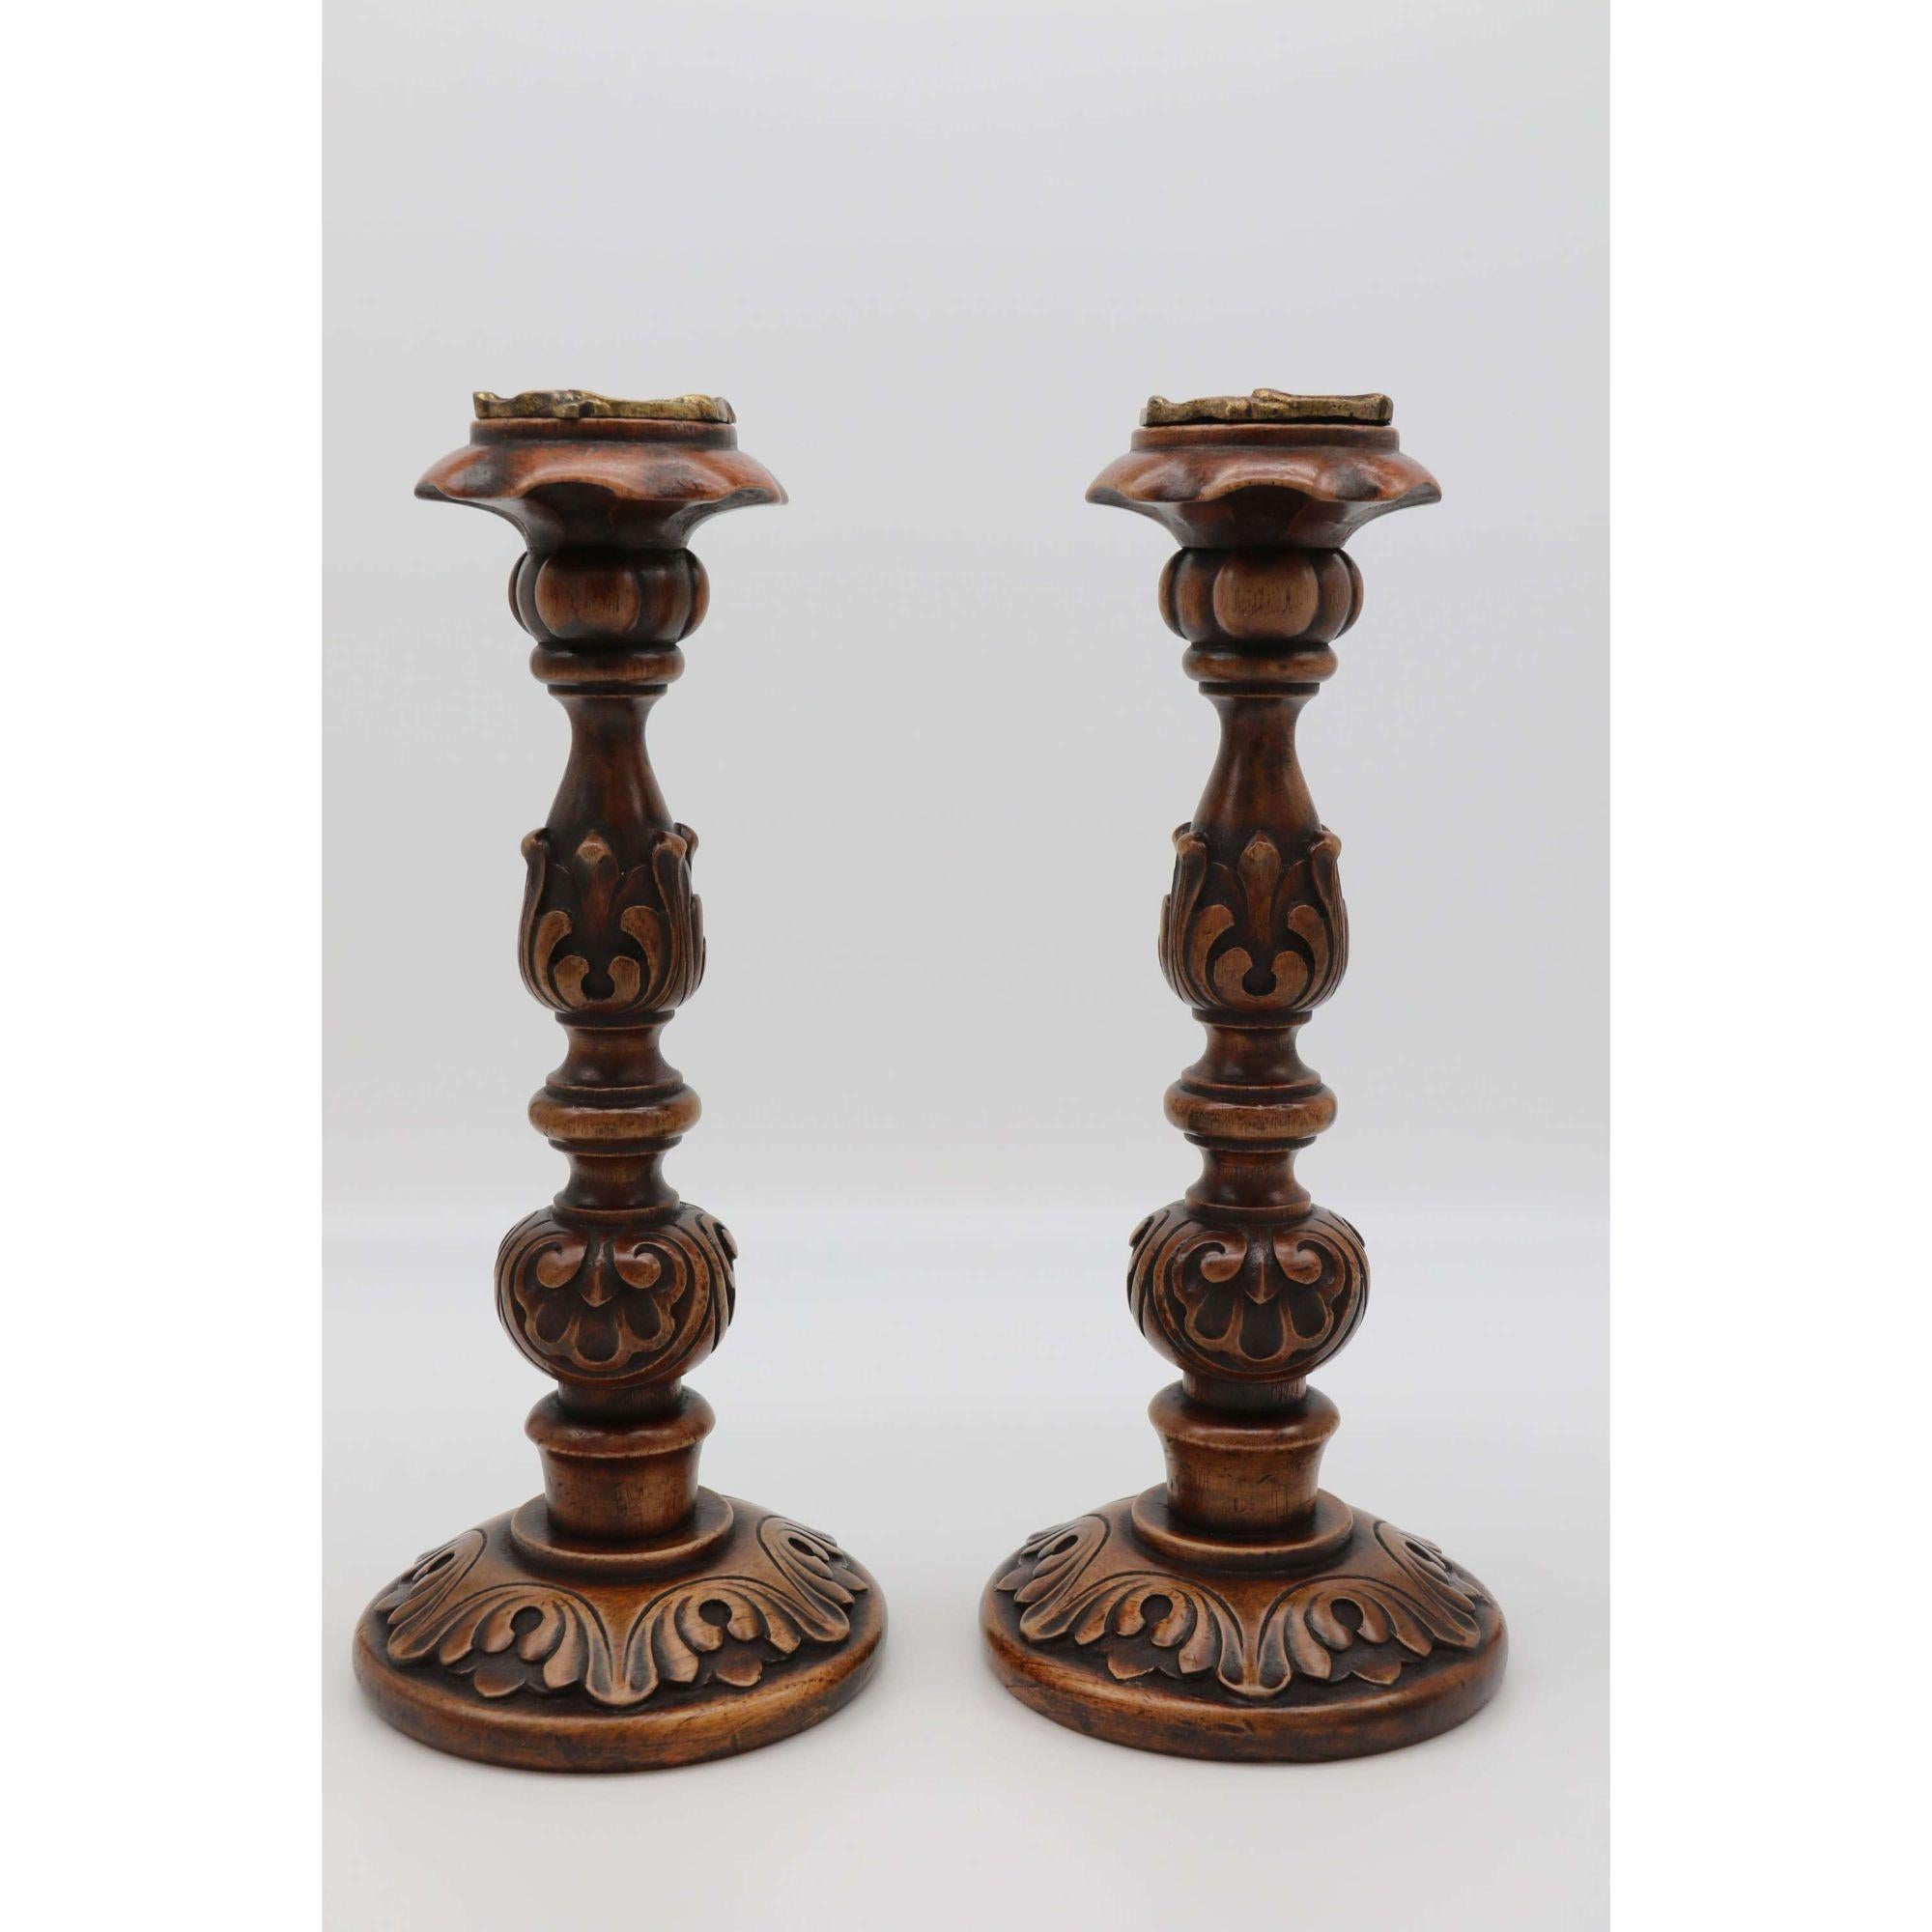 English 19th Century Carved Walnut and Brass Mounted Candlesticks, circa 1880 For Sale 2